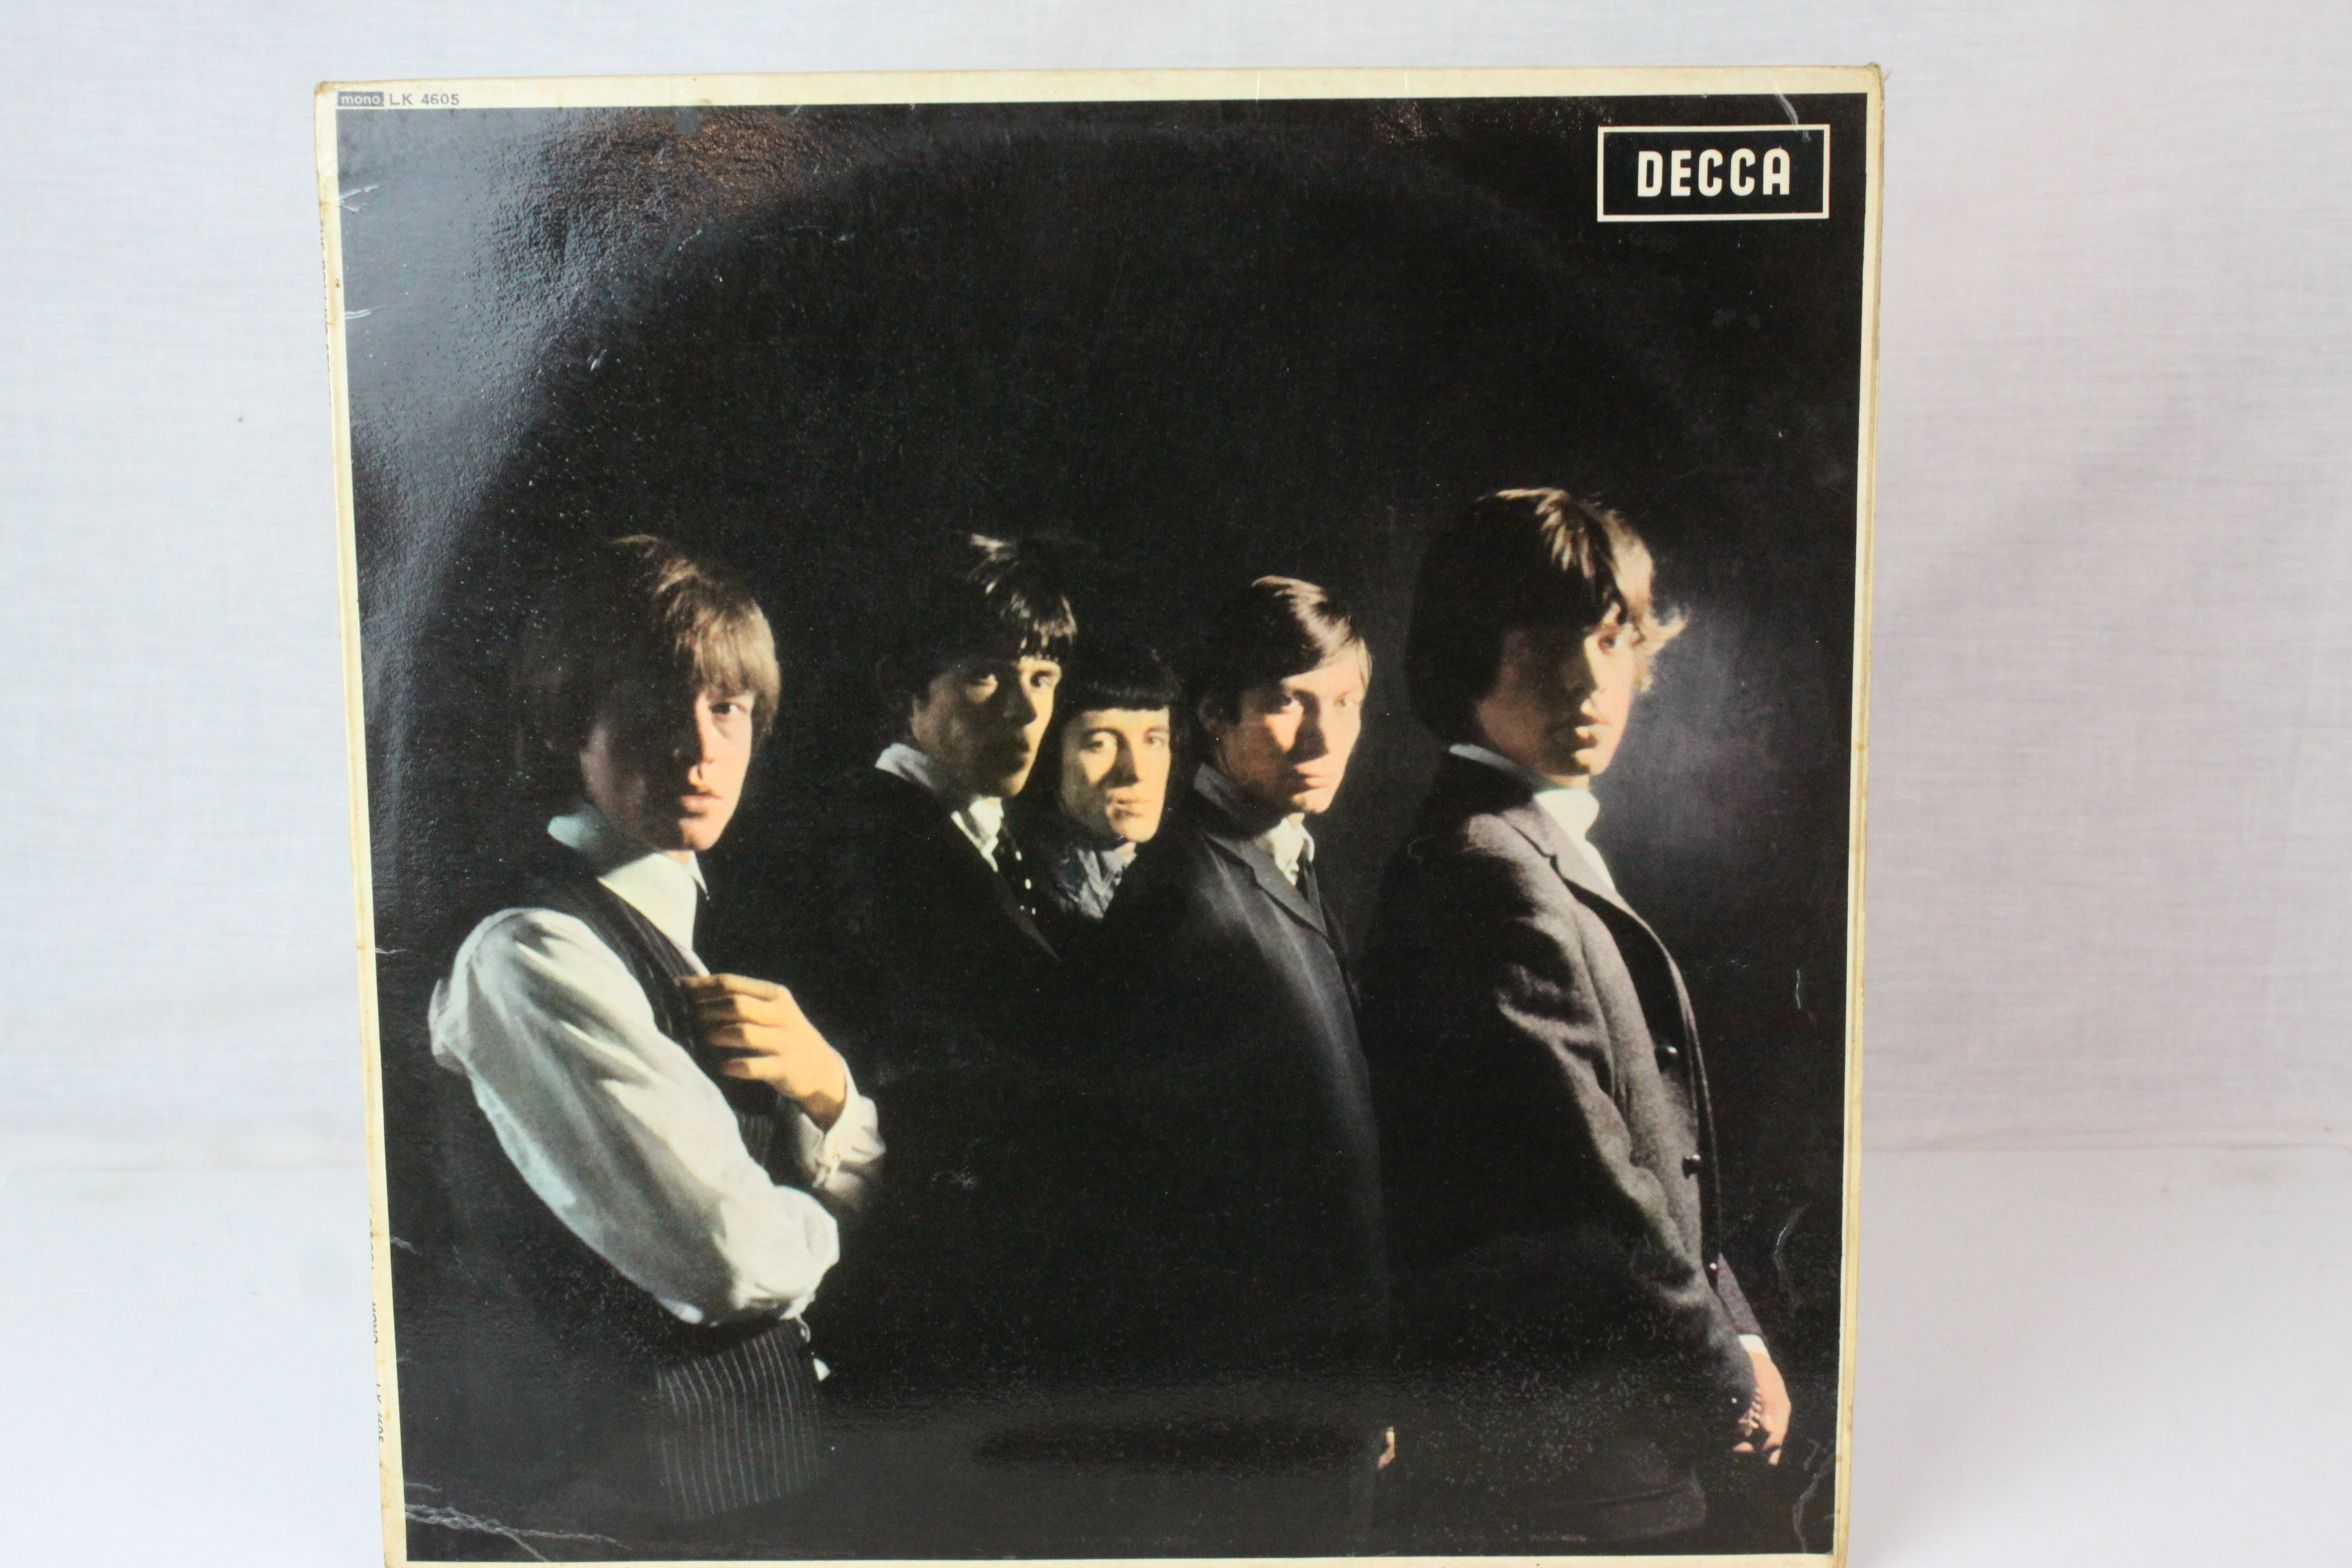 Vinyl - Two The Rolling Stones LPs to include no 1 on Decca LK4605 mono and no 2 LK4661 mono, - Image 10 of 12